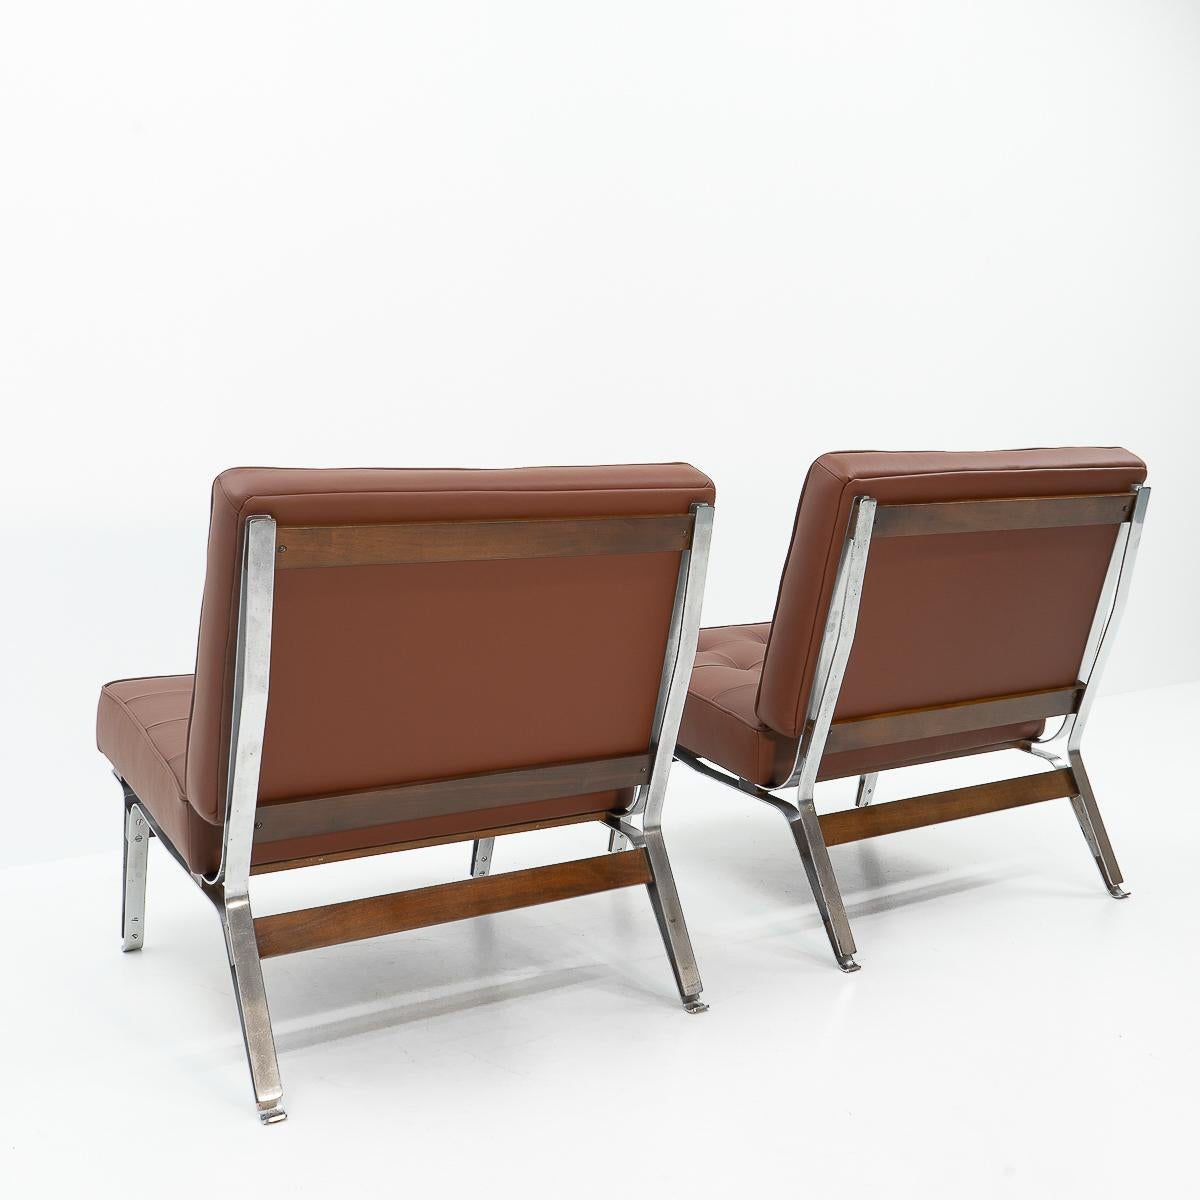 Rare Italian Design: Ico Parisi 856 Lounge Chairs for Cassina, 1950s For Sale 1